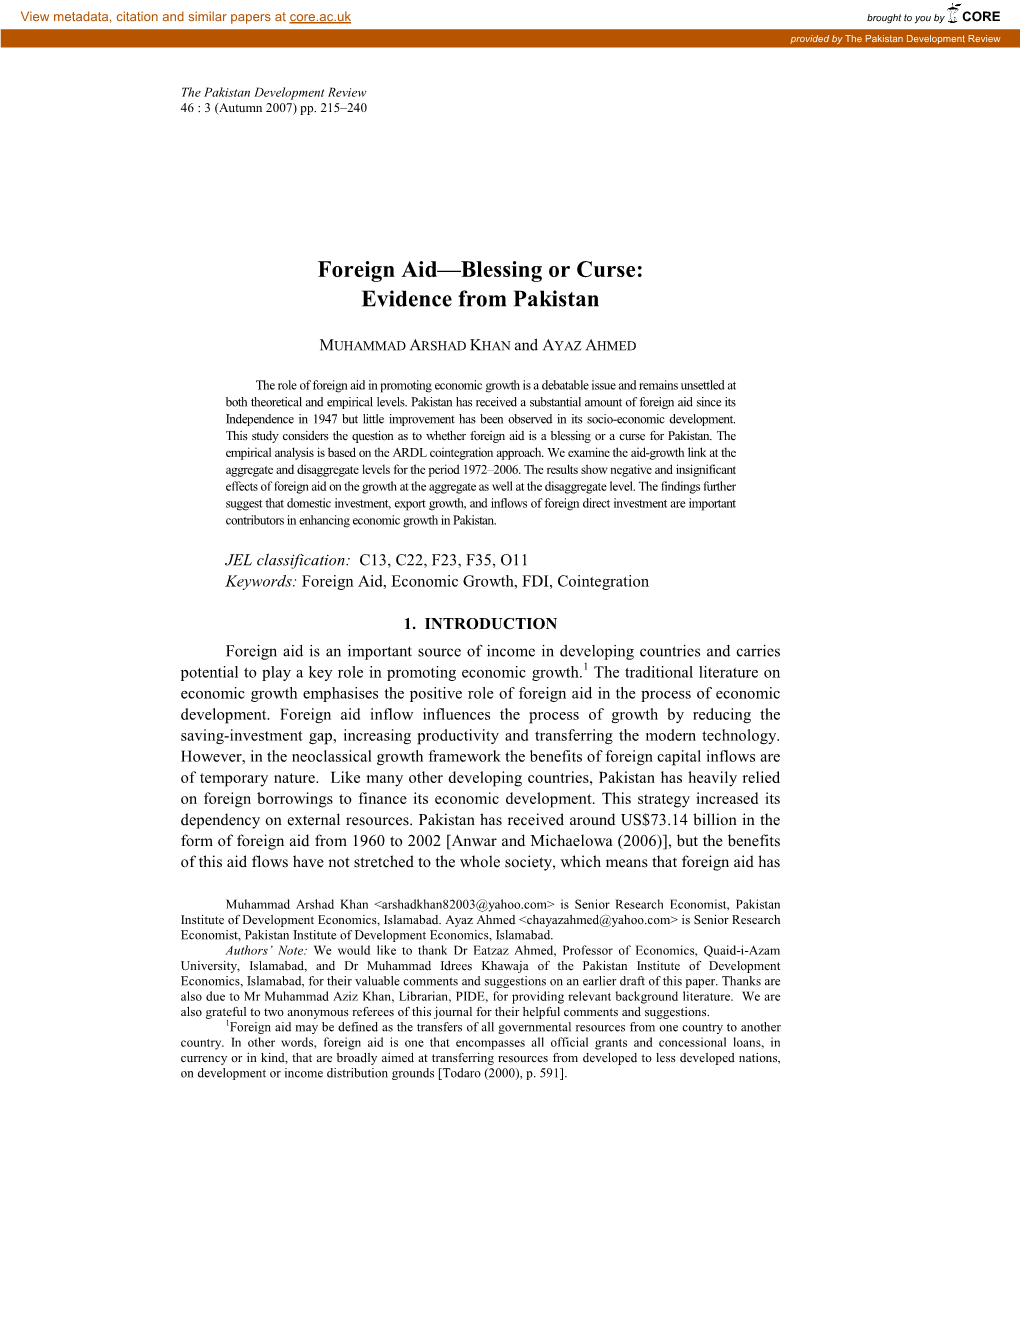 Foreign Aid—Blessing Or Curse: Evidence from Pakistan